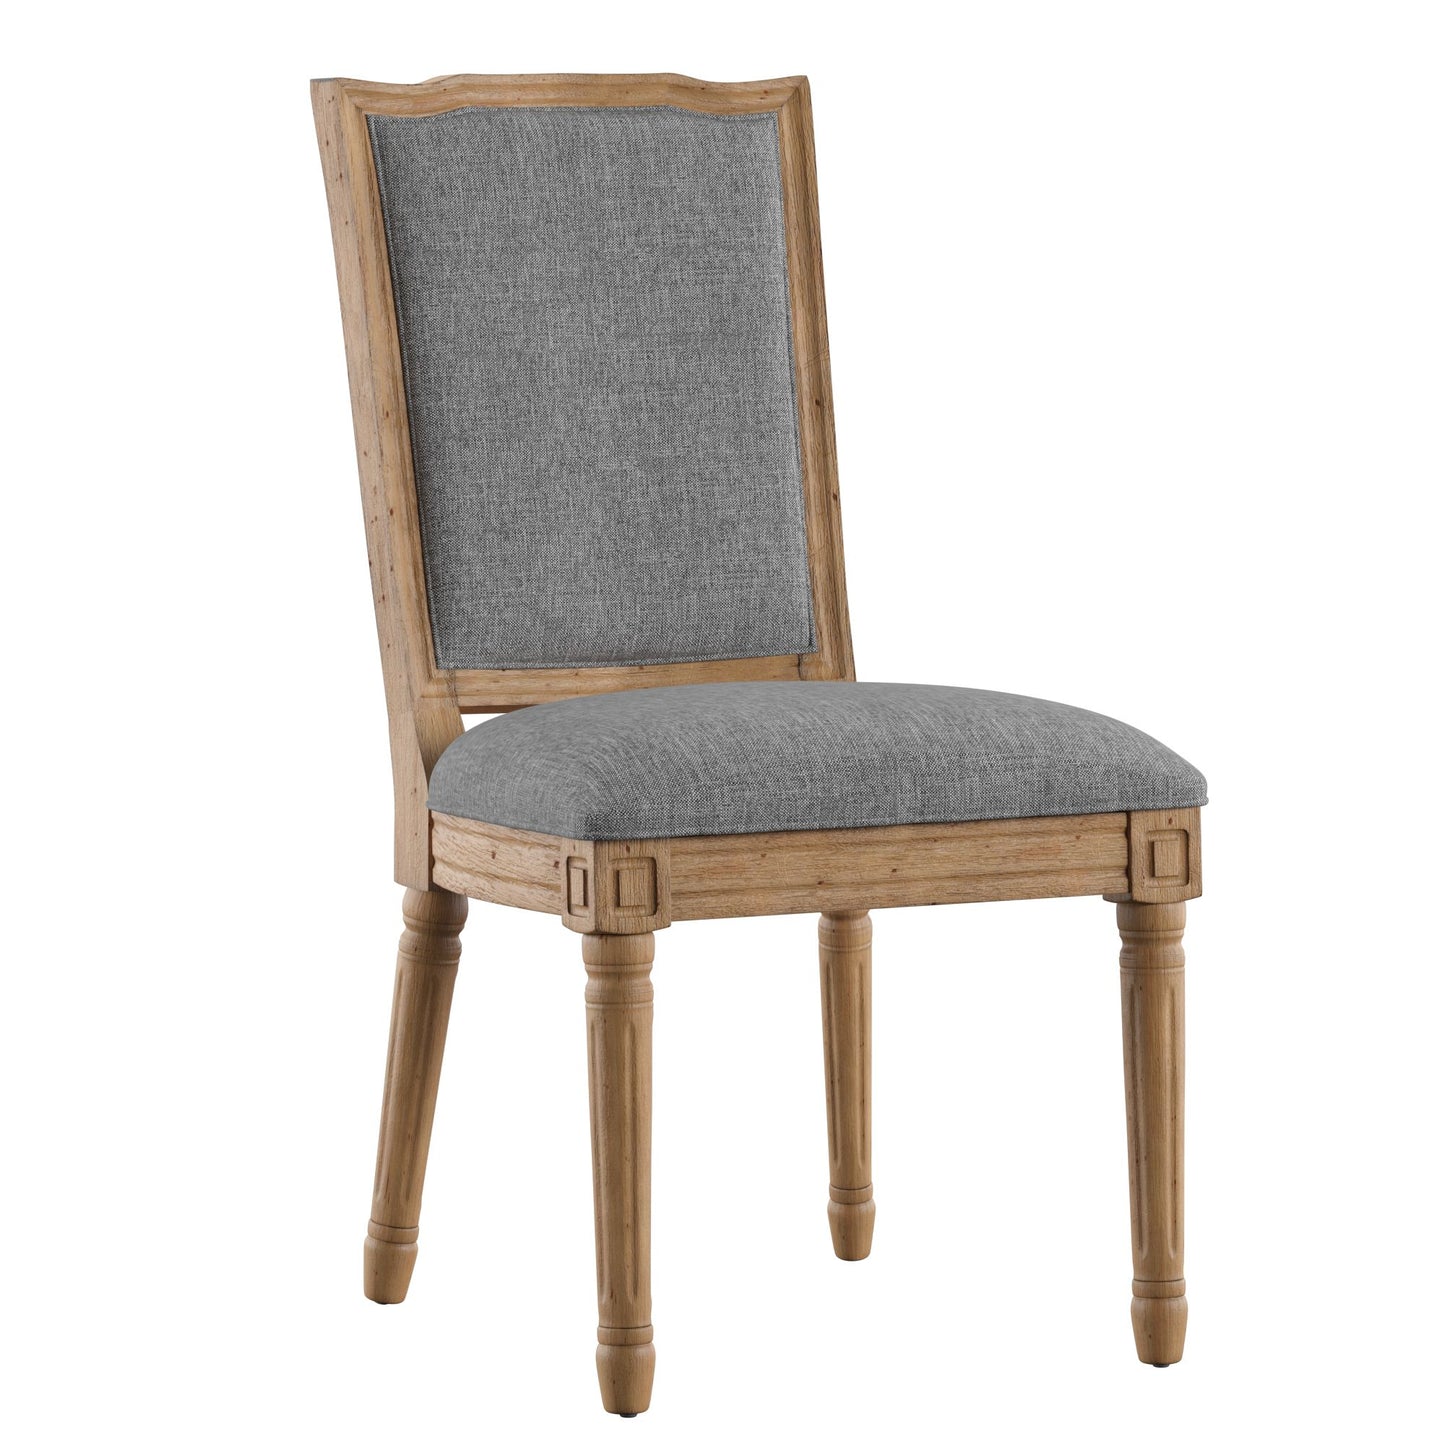 Ornate Linen and Wood Dining Chairs (Set of 2) - Grey Linen, Natural Finish